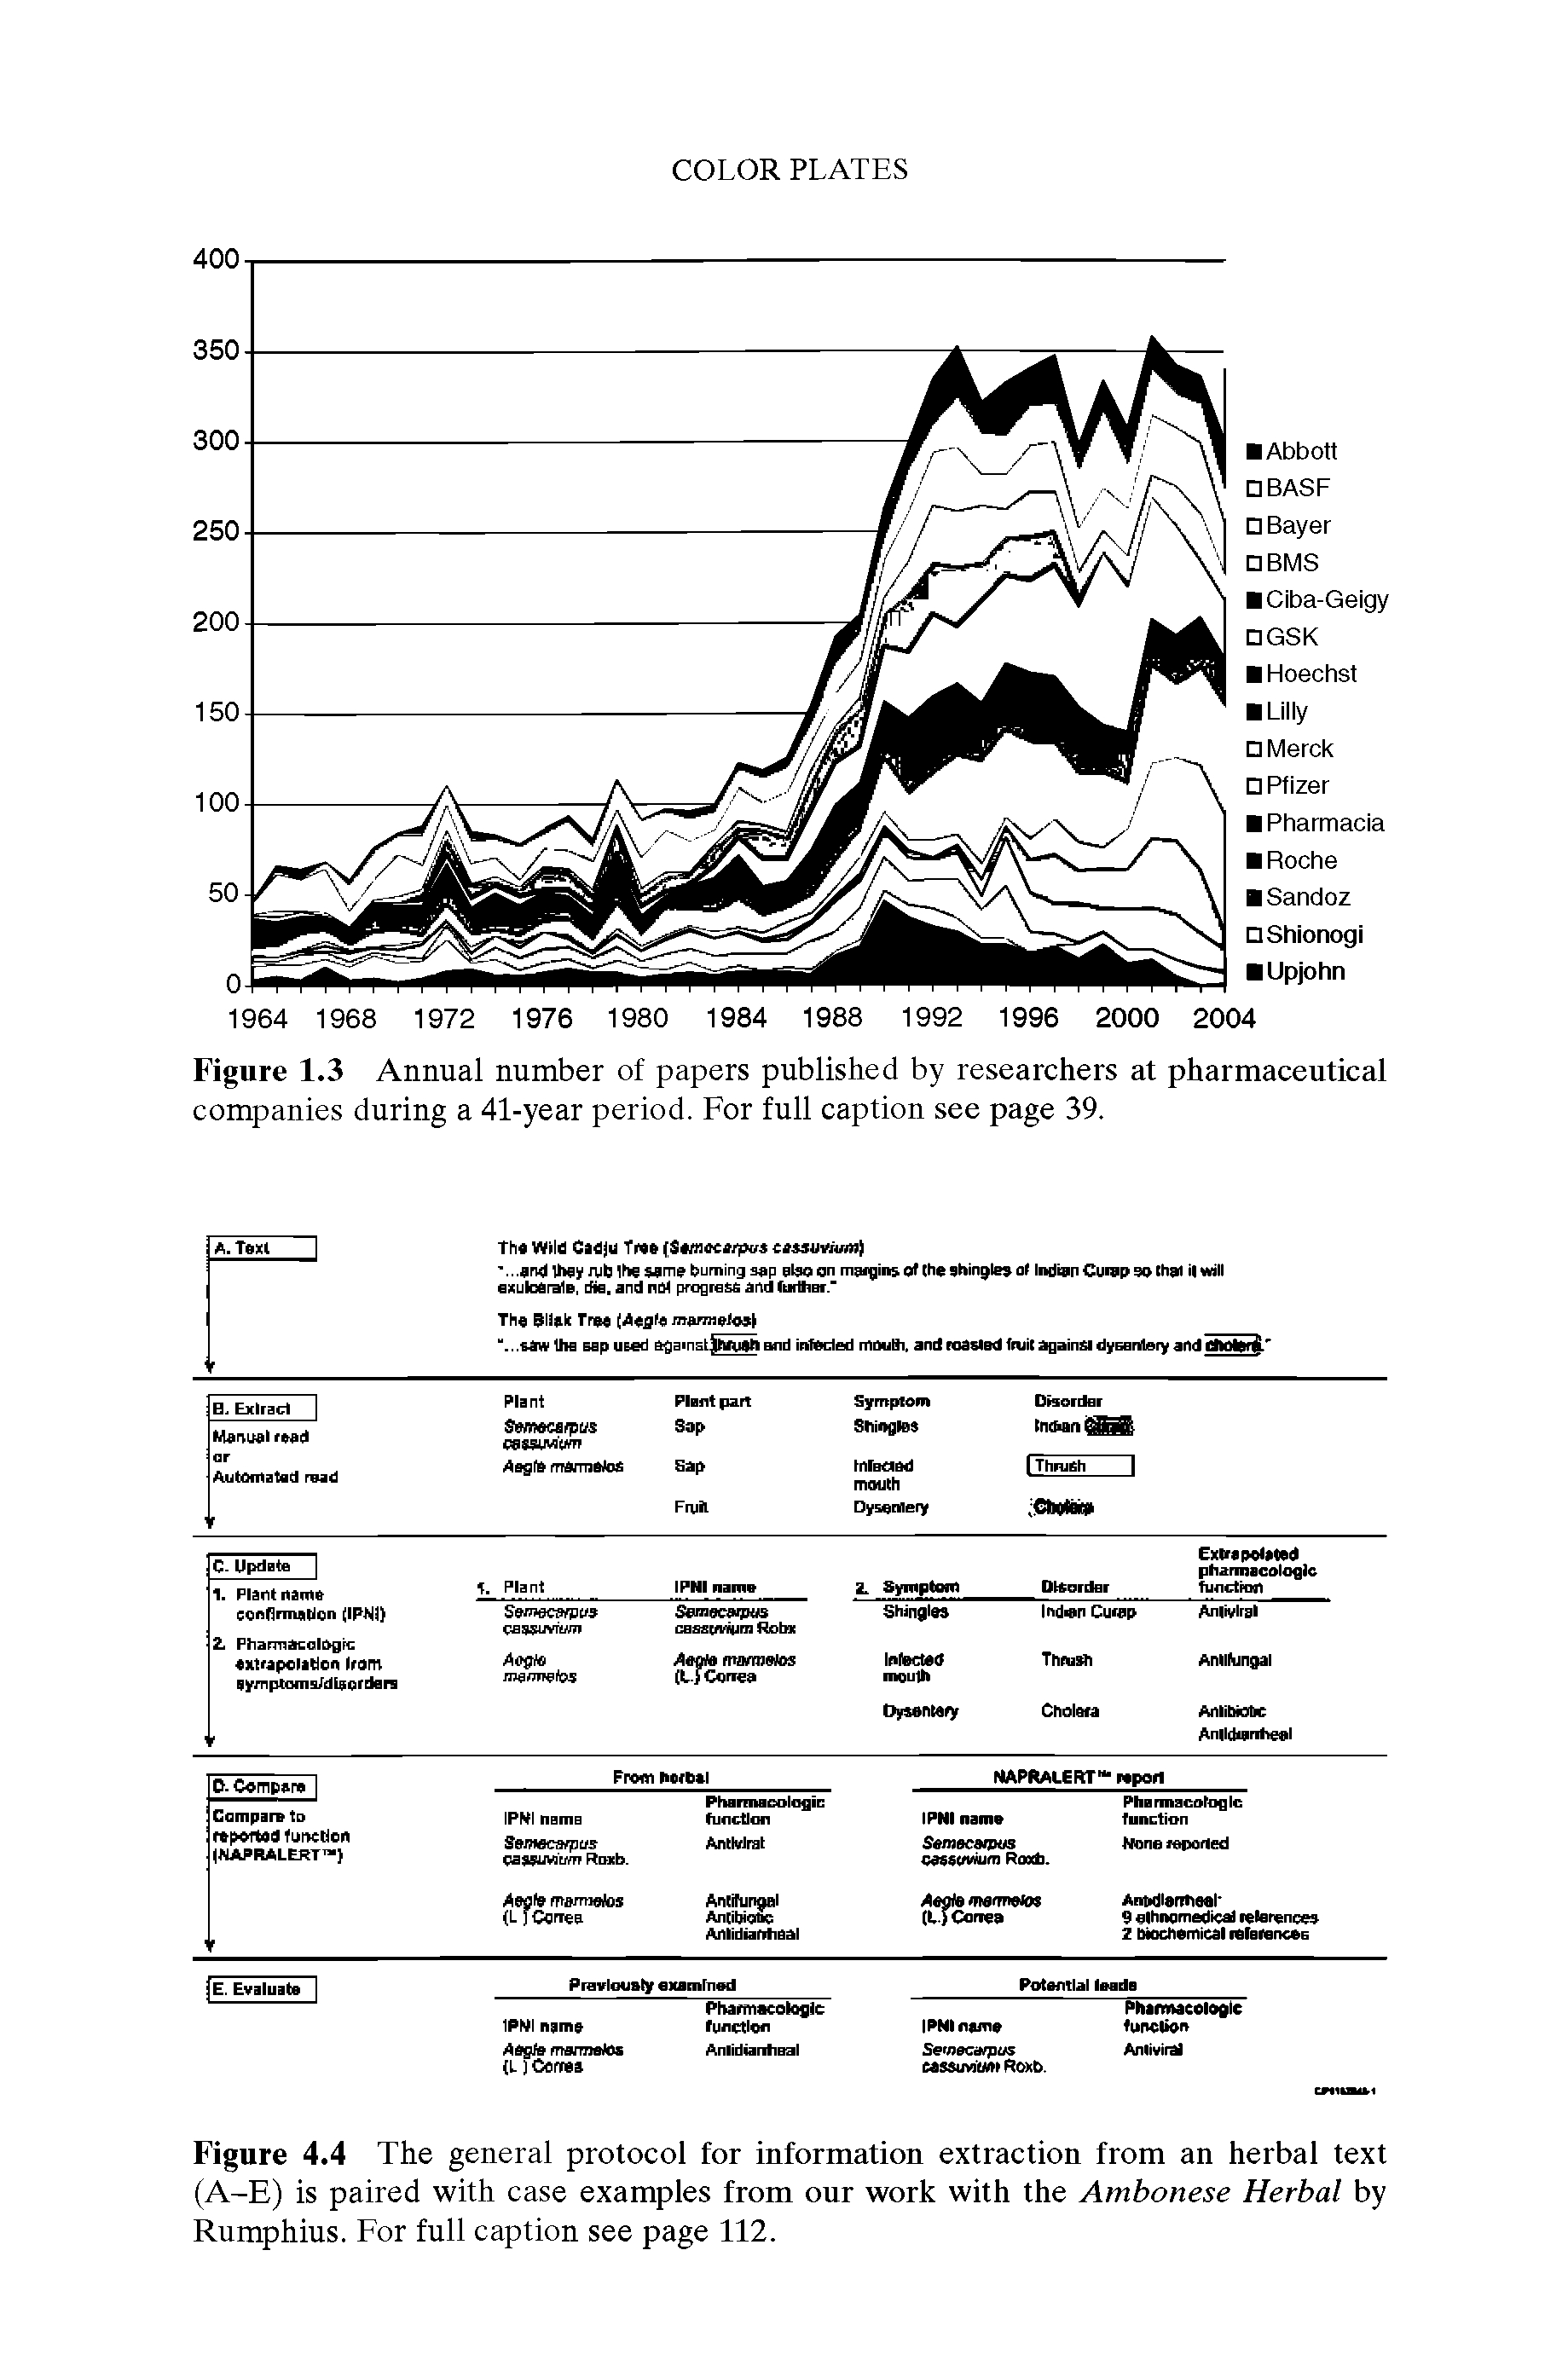 Figure 1.3 Annual number of papers published by researchers at pharmaceutical companies during a 41-year period. For full caption see page 39.